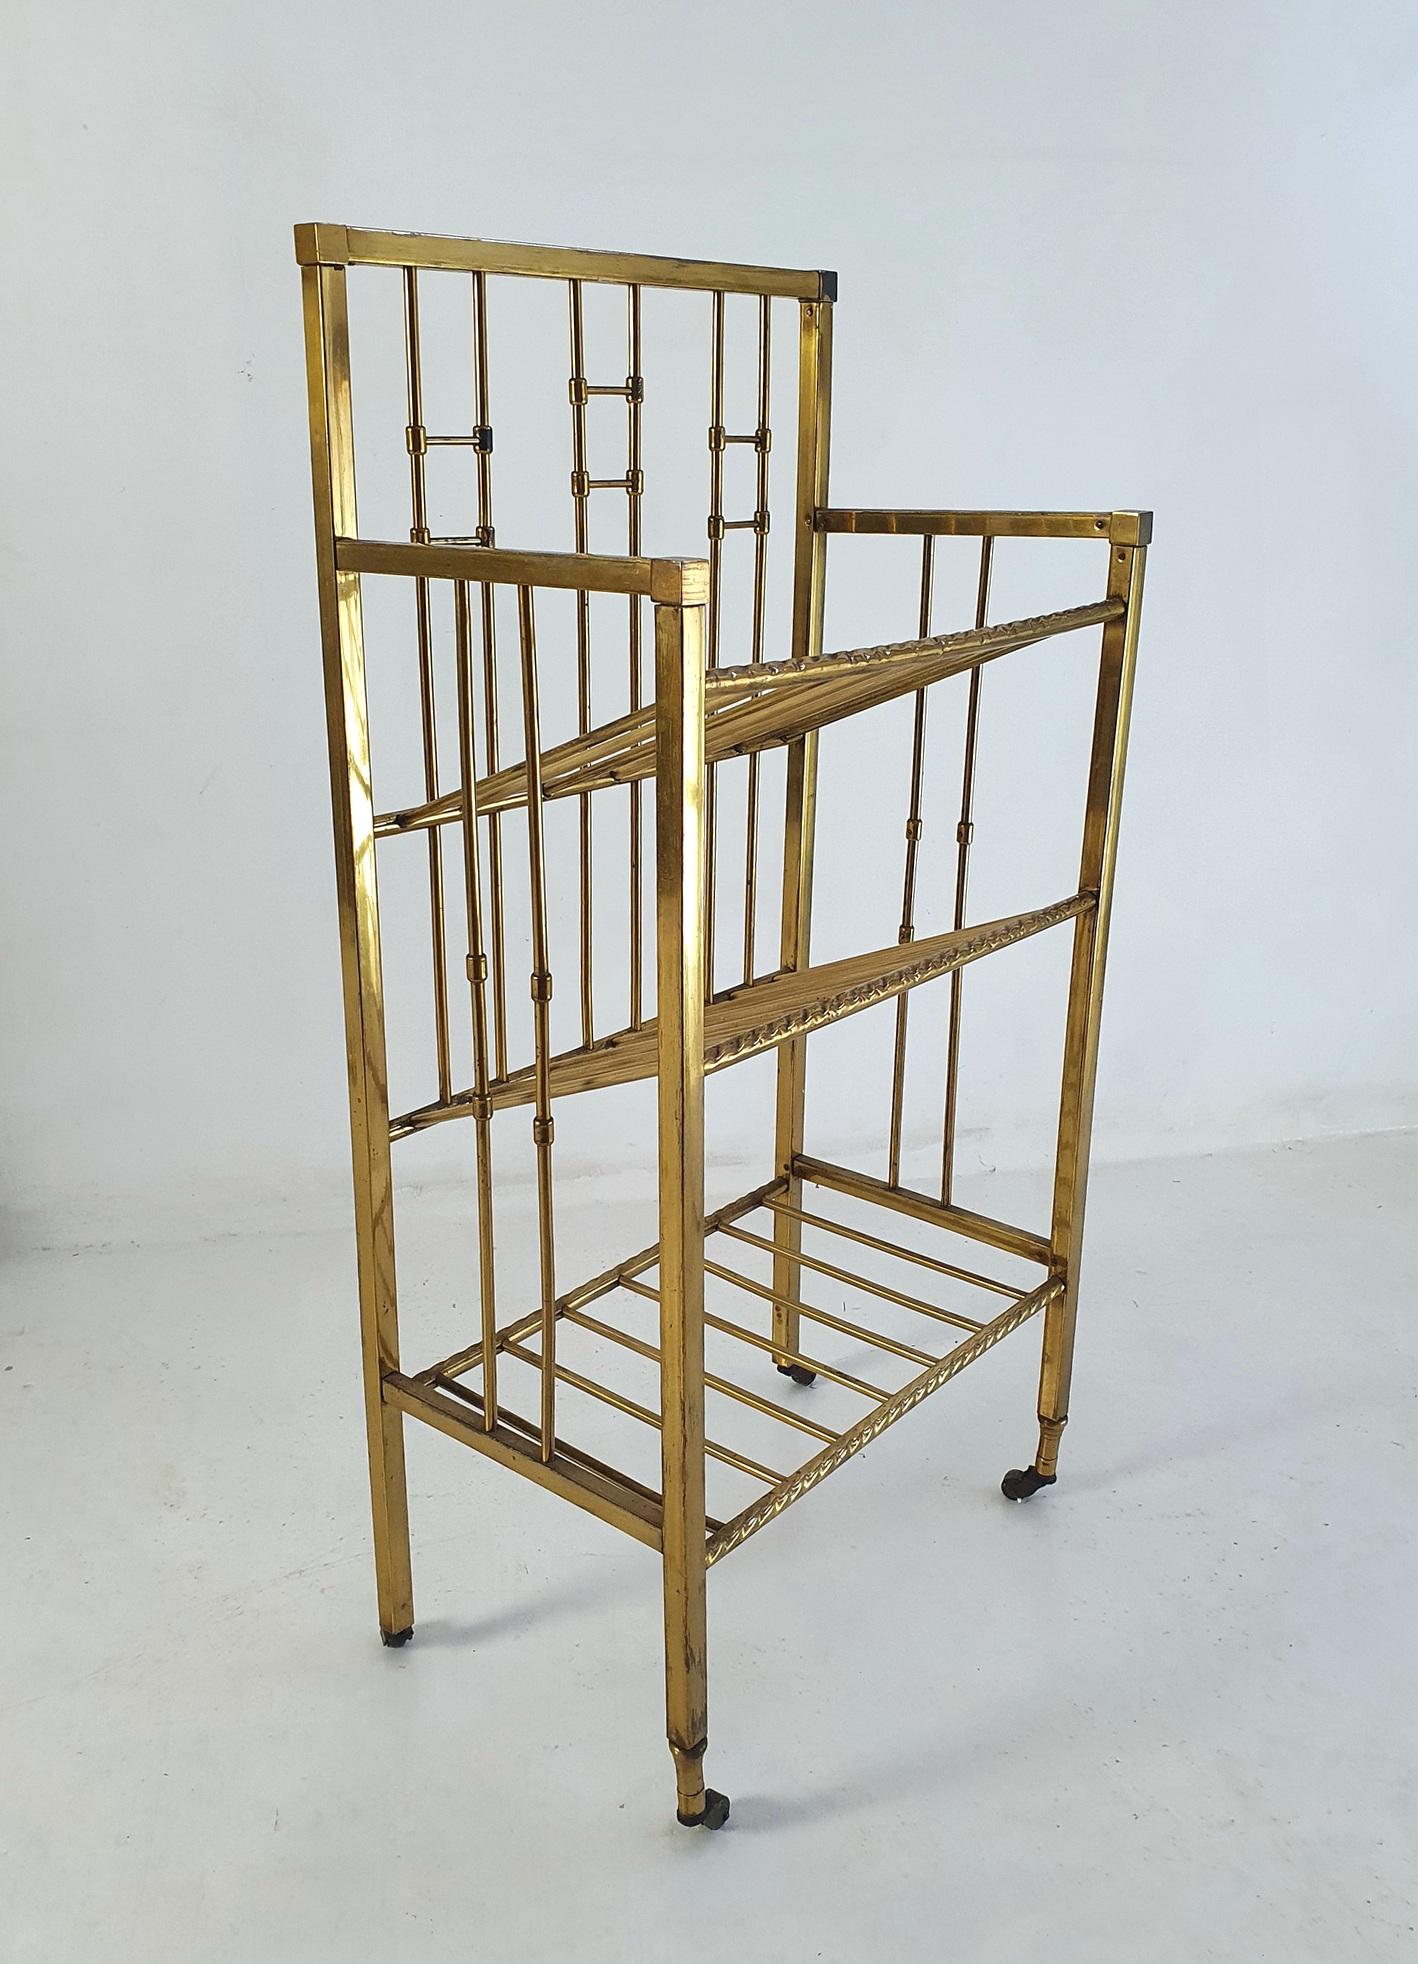 A tall and elegant rack for magazines or musical notes in brass hand made in Italy during the early 1900's. It would stand as well by the sofa as by the grand piano. As the shelves are slanted it can hold large magazines even though it is only 30 cm